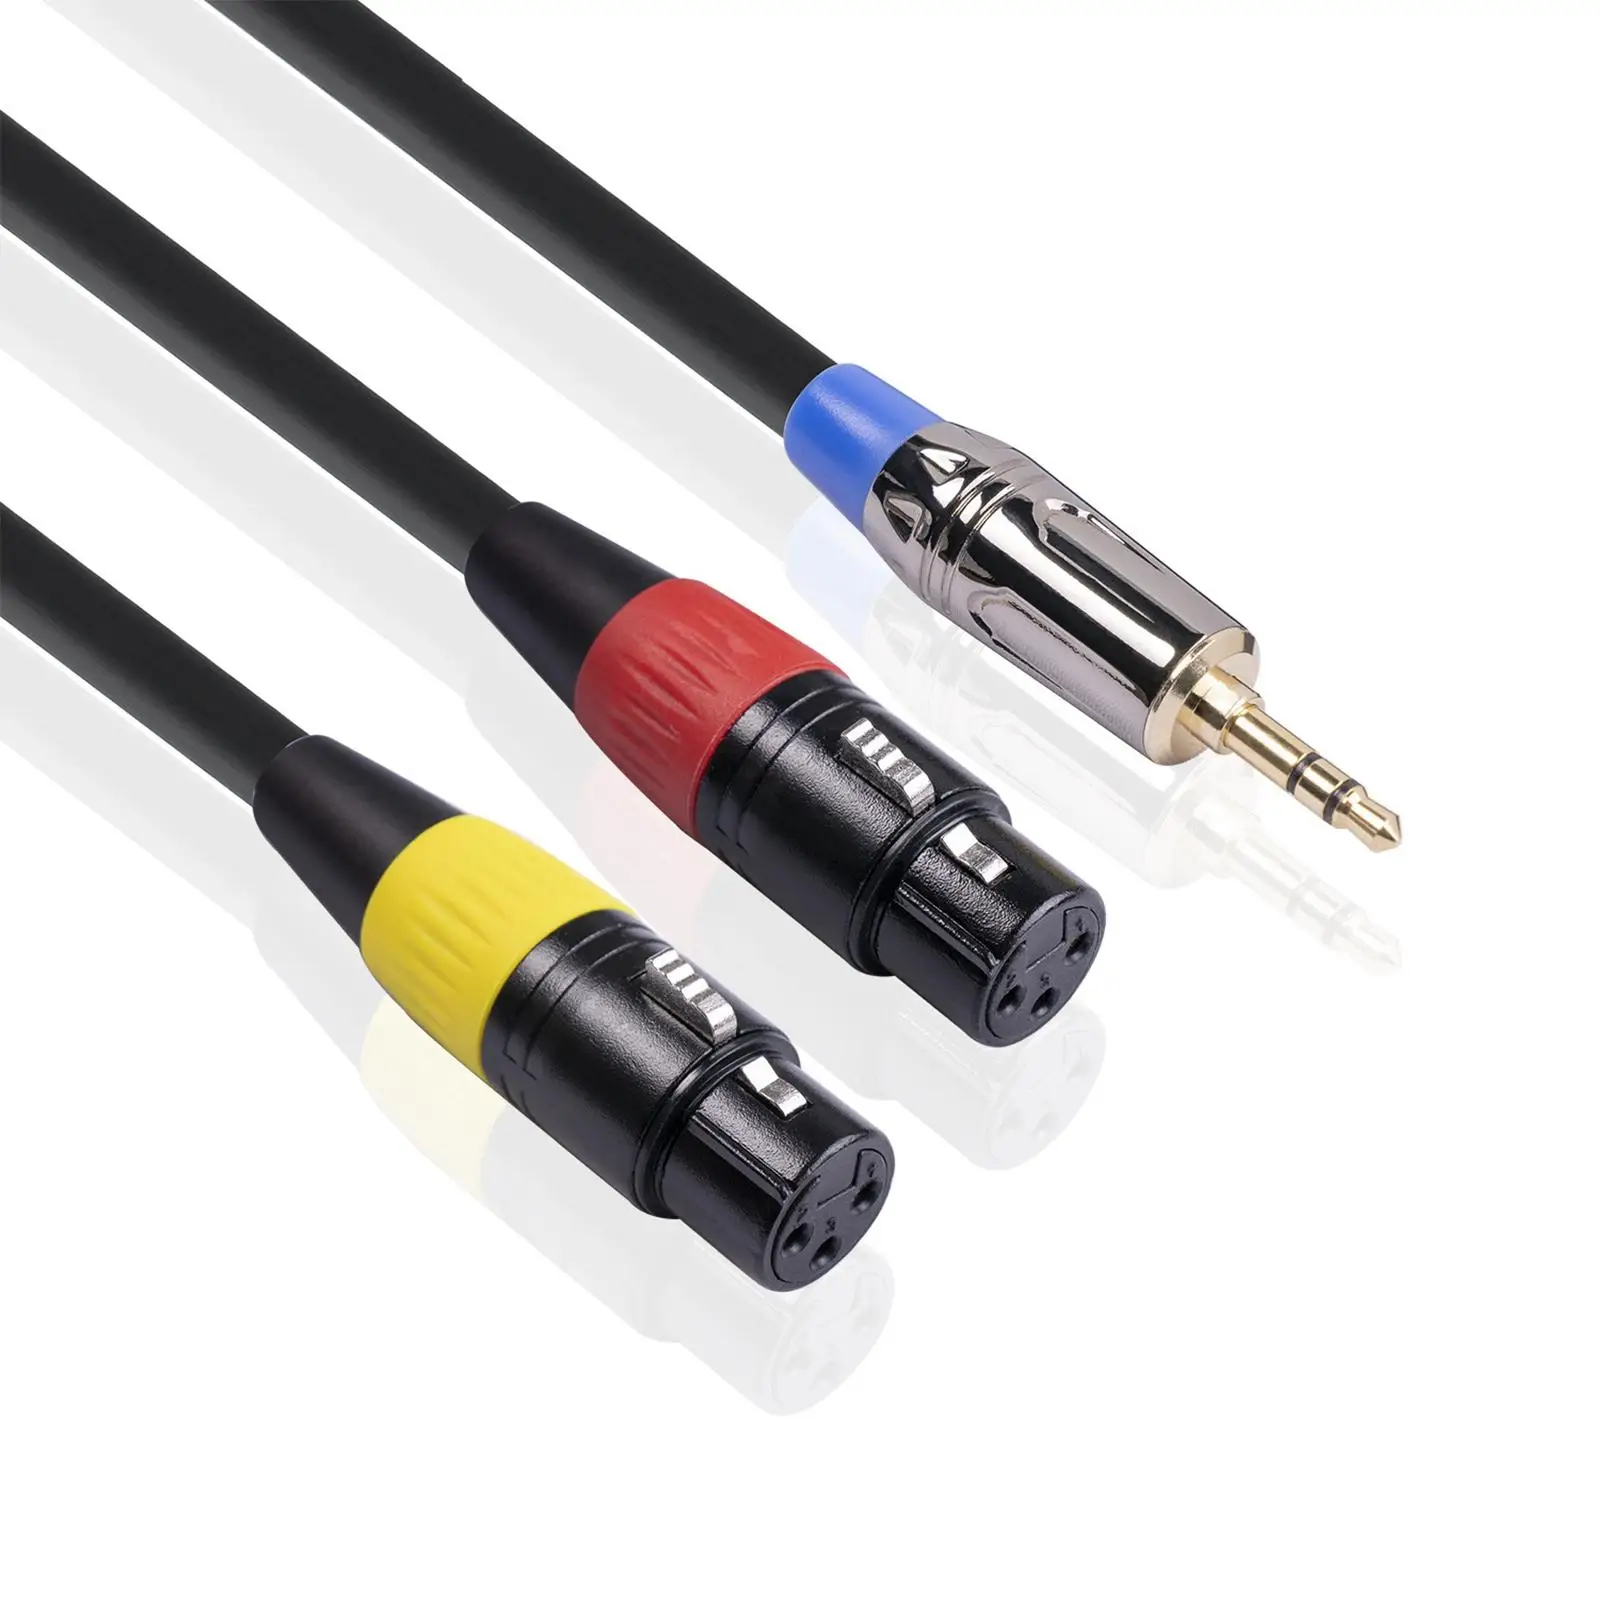 1 Piece Dual Female Audio Cable XLR Recorder 1/8 inch to XLR Breakout Cable Dual Female Heavy Duty 3M Jack Male to 2 XLR Female